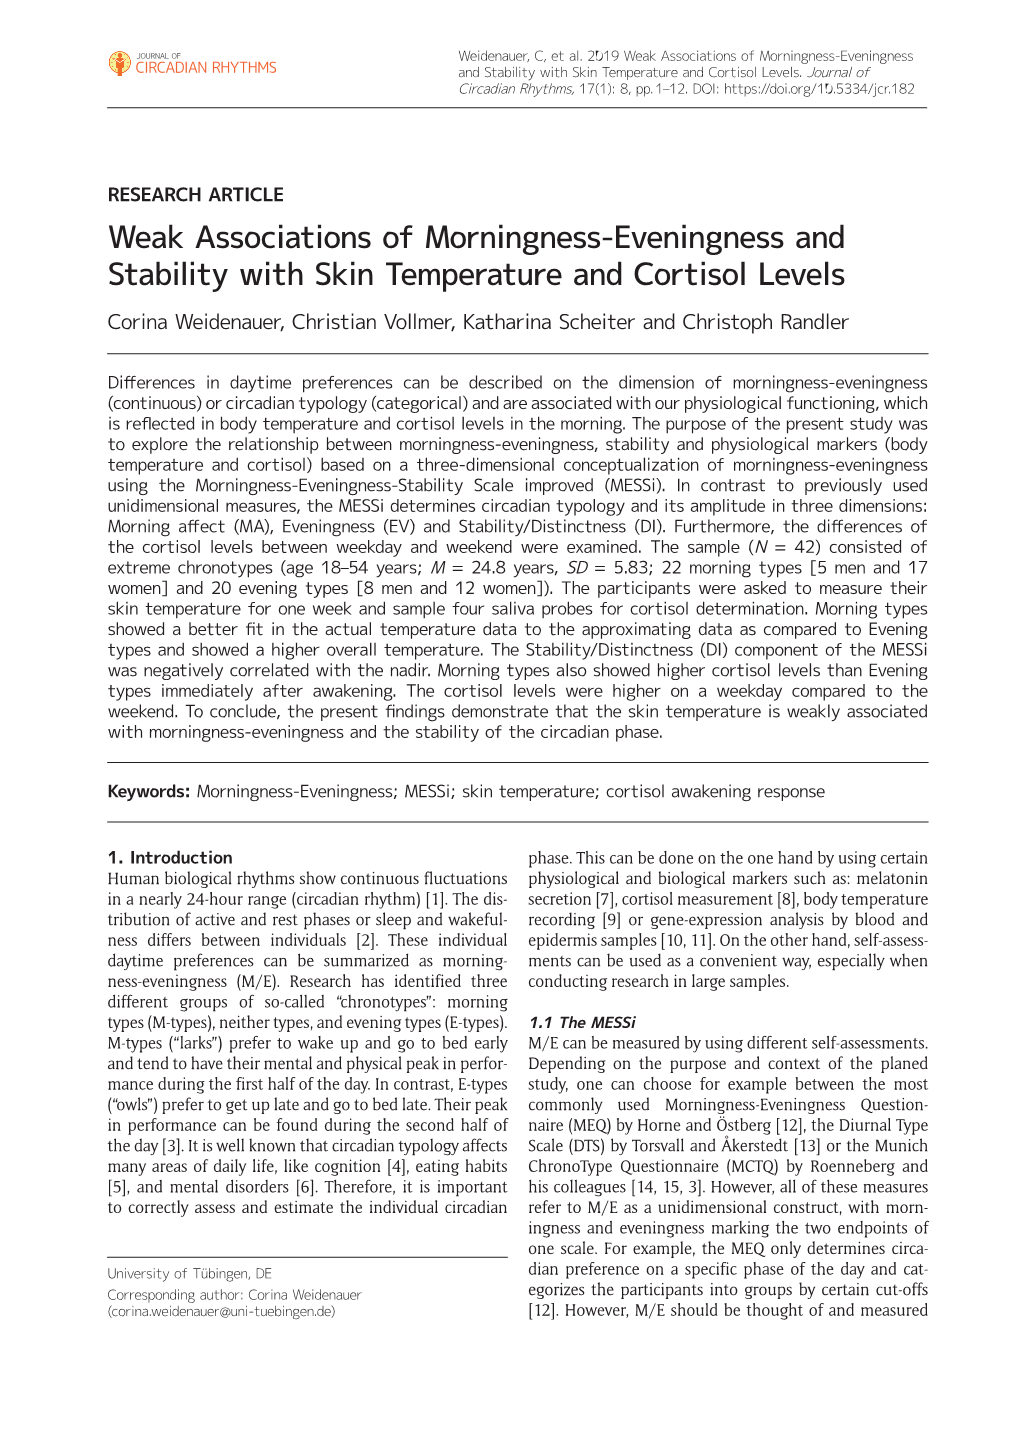 Weak Associations of Morningness-Eveningness and Stability with Skin Temperature and Cortisol Levels